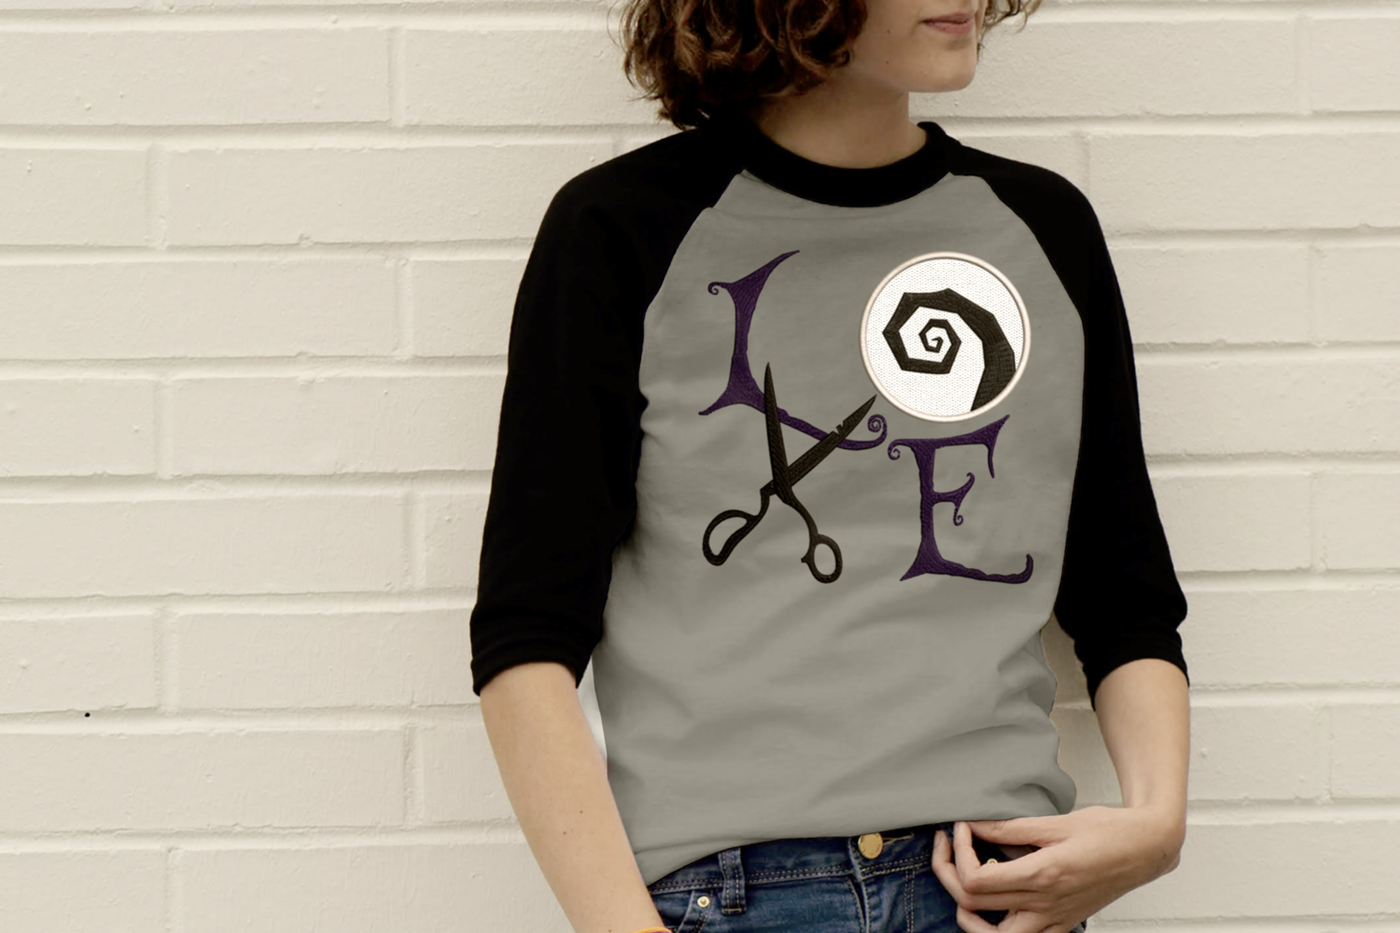 White-presenting teen girl wears a raglan tee with the applique word "LOVE" set on a square. The letters are in gothic style. In place of the O is a circle with a rough swirl embroidery. In place of the V are a pair of old scissors.